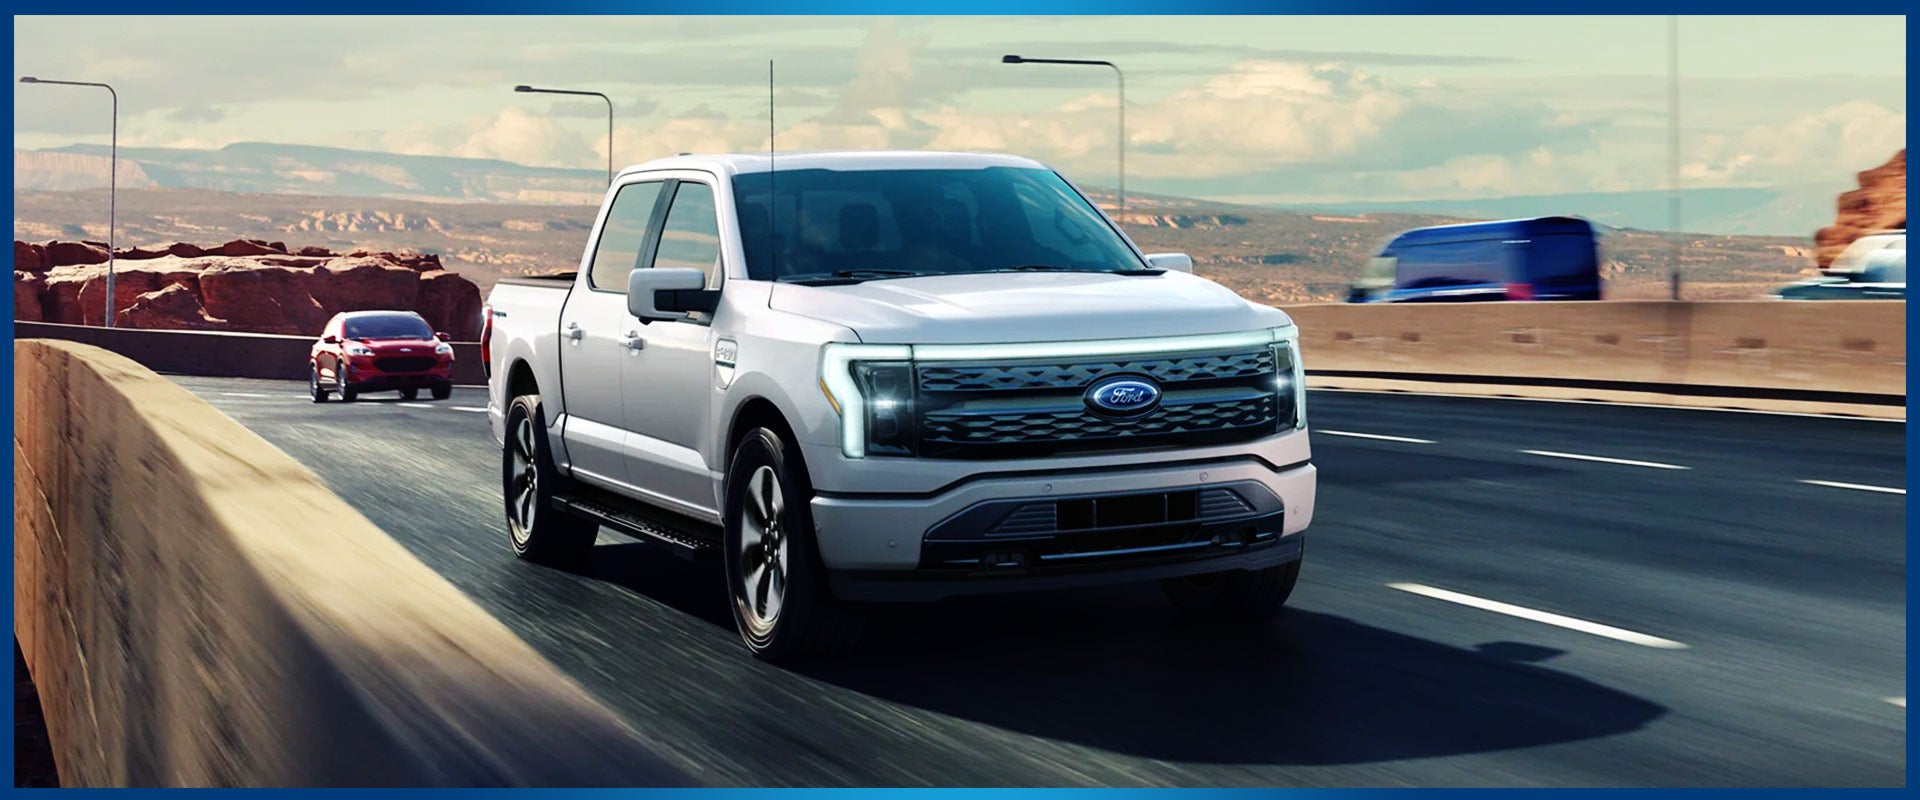 2022 Ford F-150 Lightning | Range, Towing Capacity & More Specs